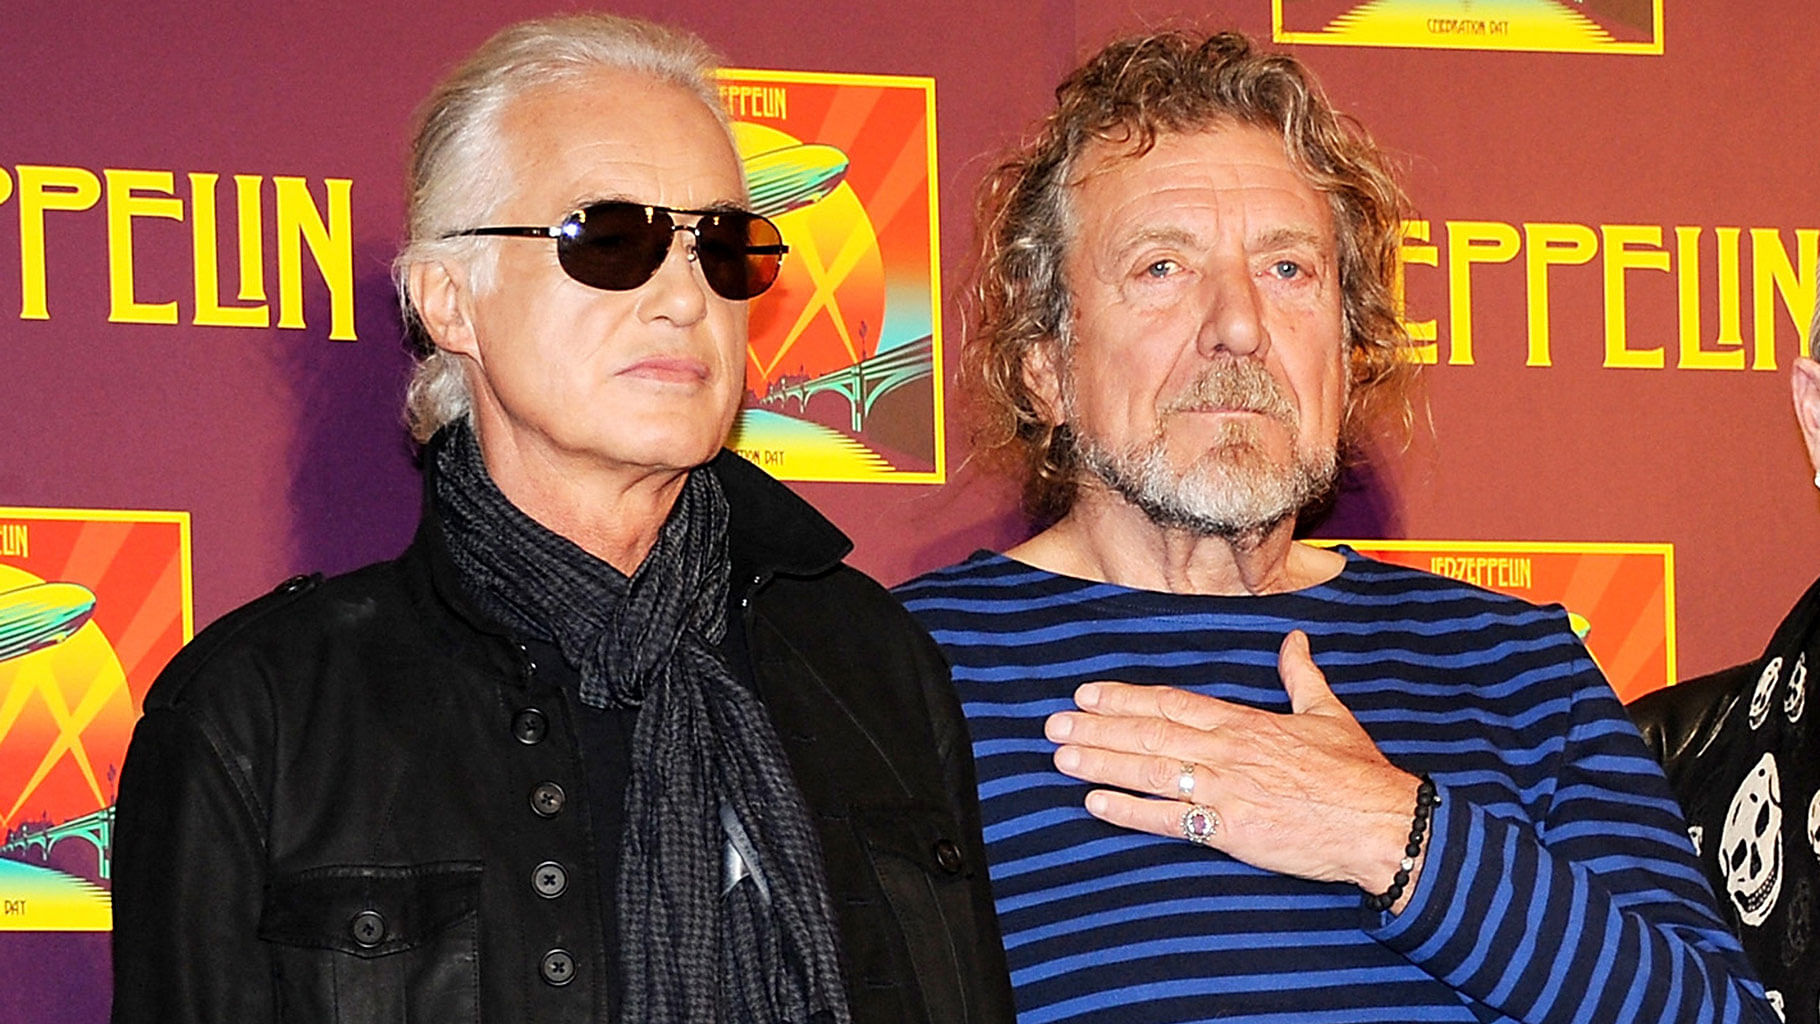 A file photo of the members of Led Zeppelin, guitarist Jimmy Page, left, and singer Robert Plant. (Photo: AP)